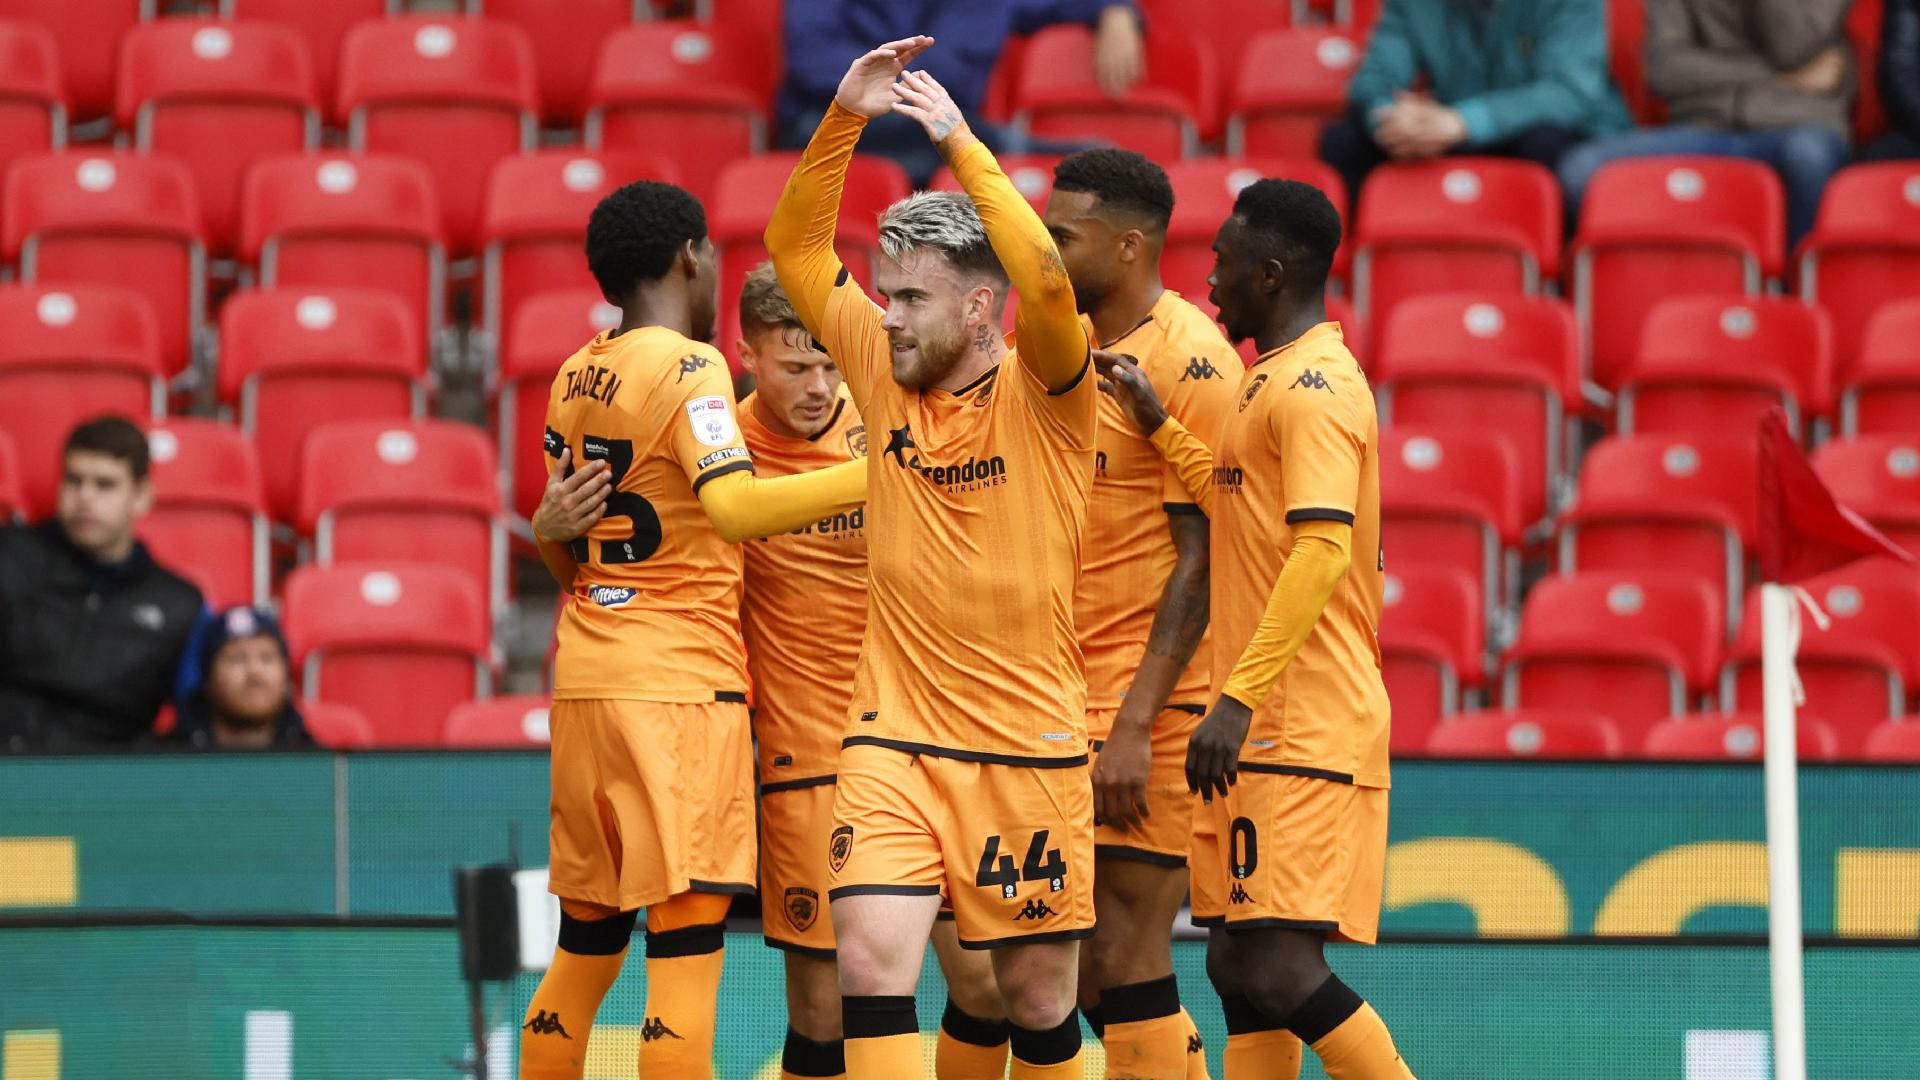 Hull ease to 3-1 win at Stoke to climb into Championship play-off places